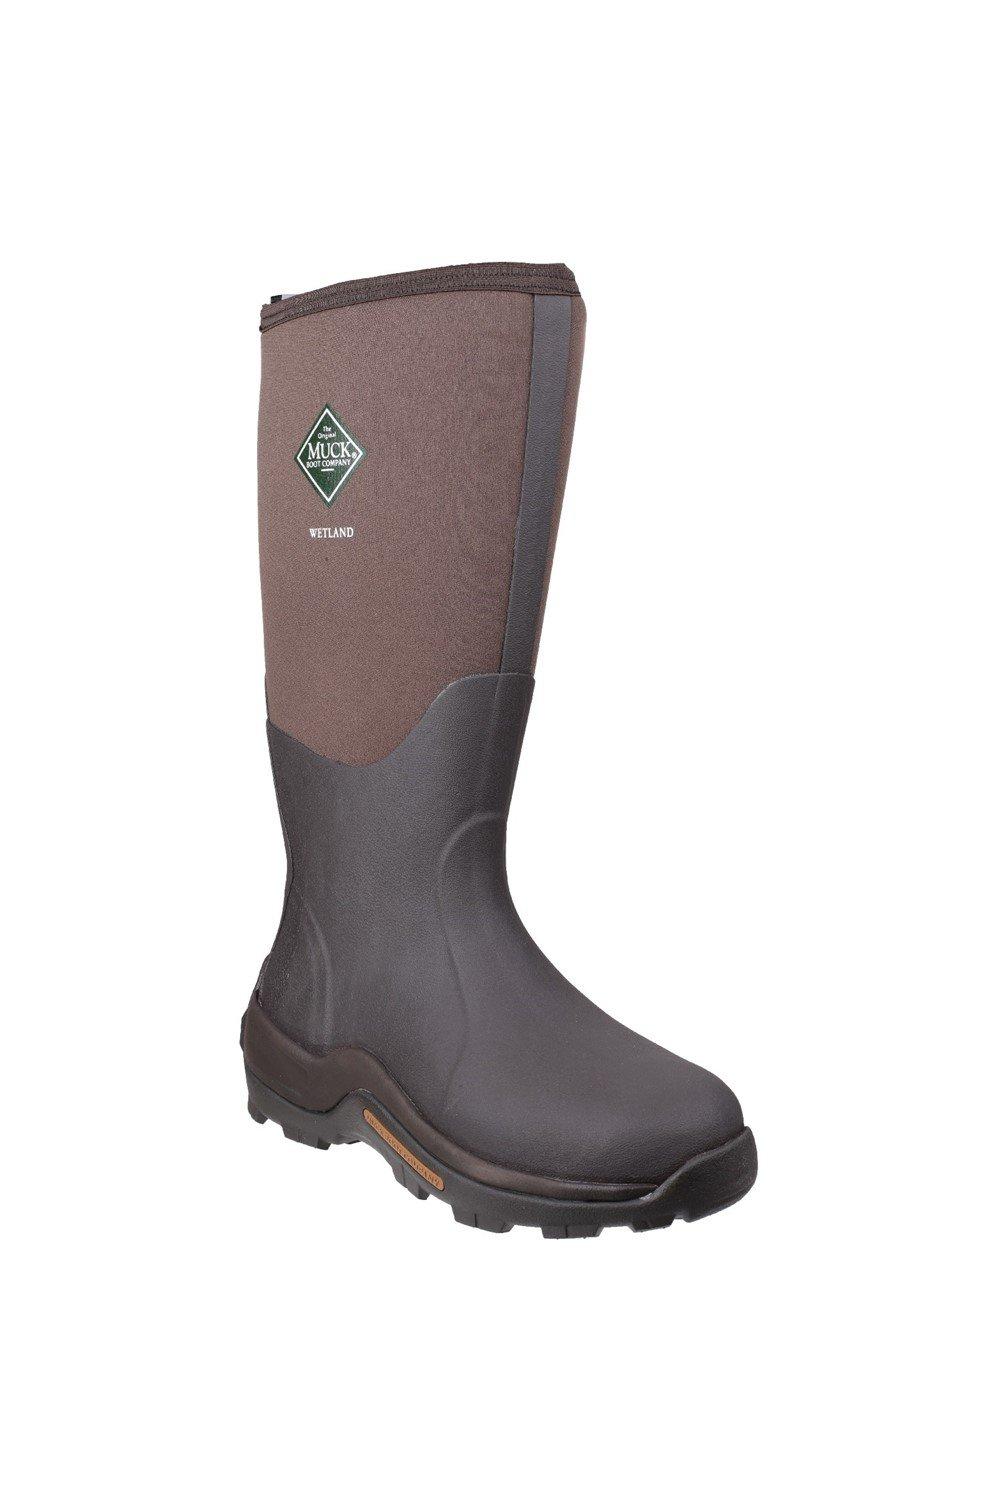 Muck Boots 'Wetland' Wellington Boots|Size: 9|brown